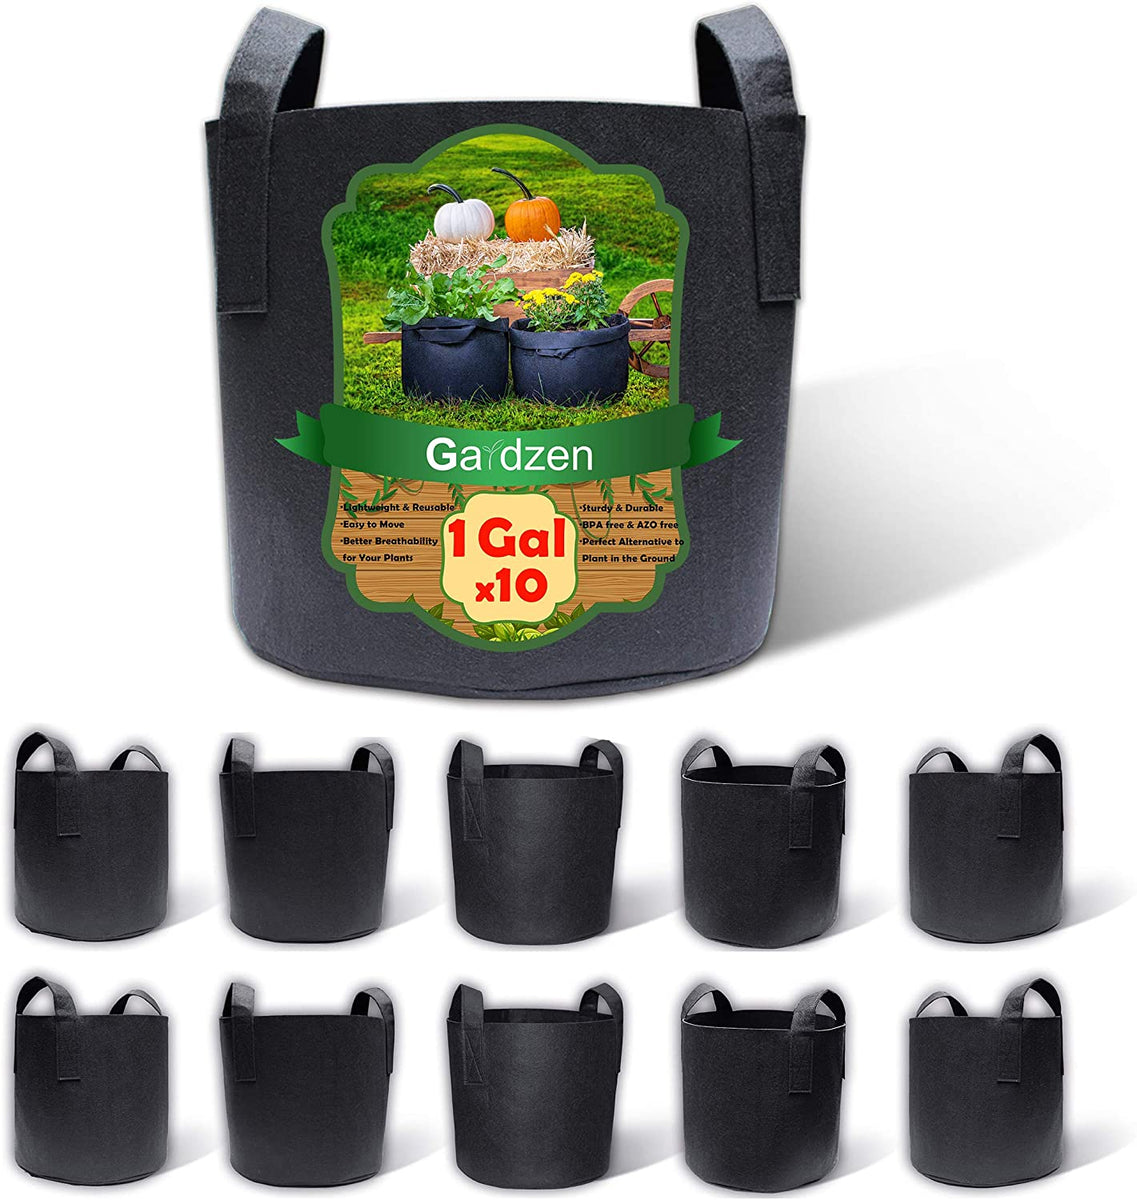 iPower 7 gal. Square Grow Bags Thick Fabric Planting Pots with Handles for Indoor and Outdoor Garden in Black (5-Pack)